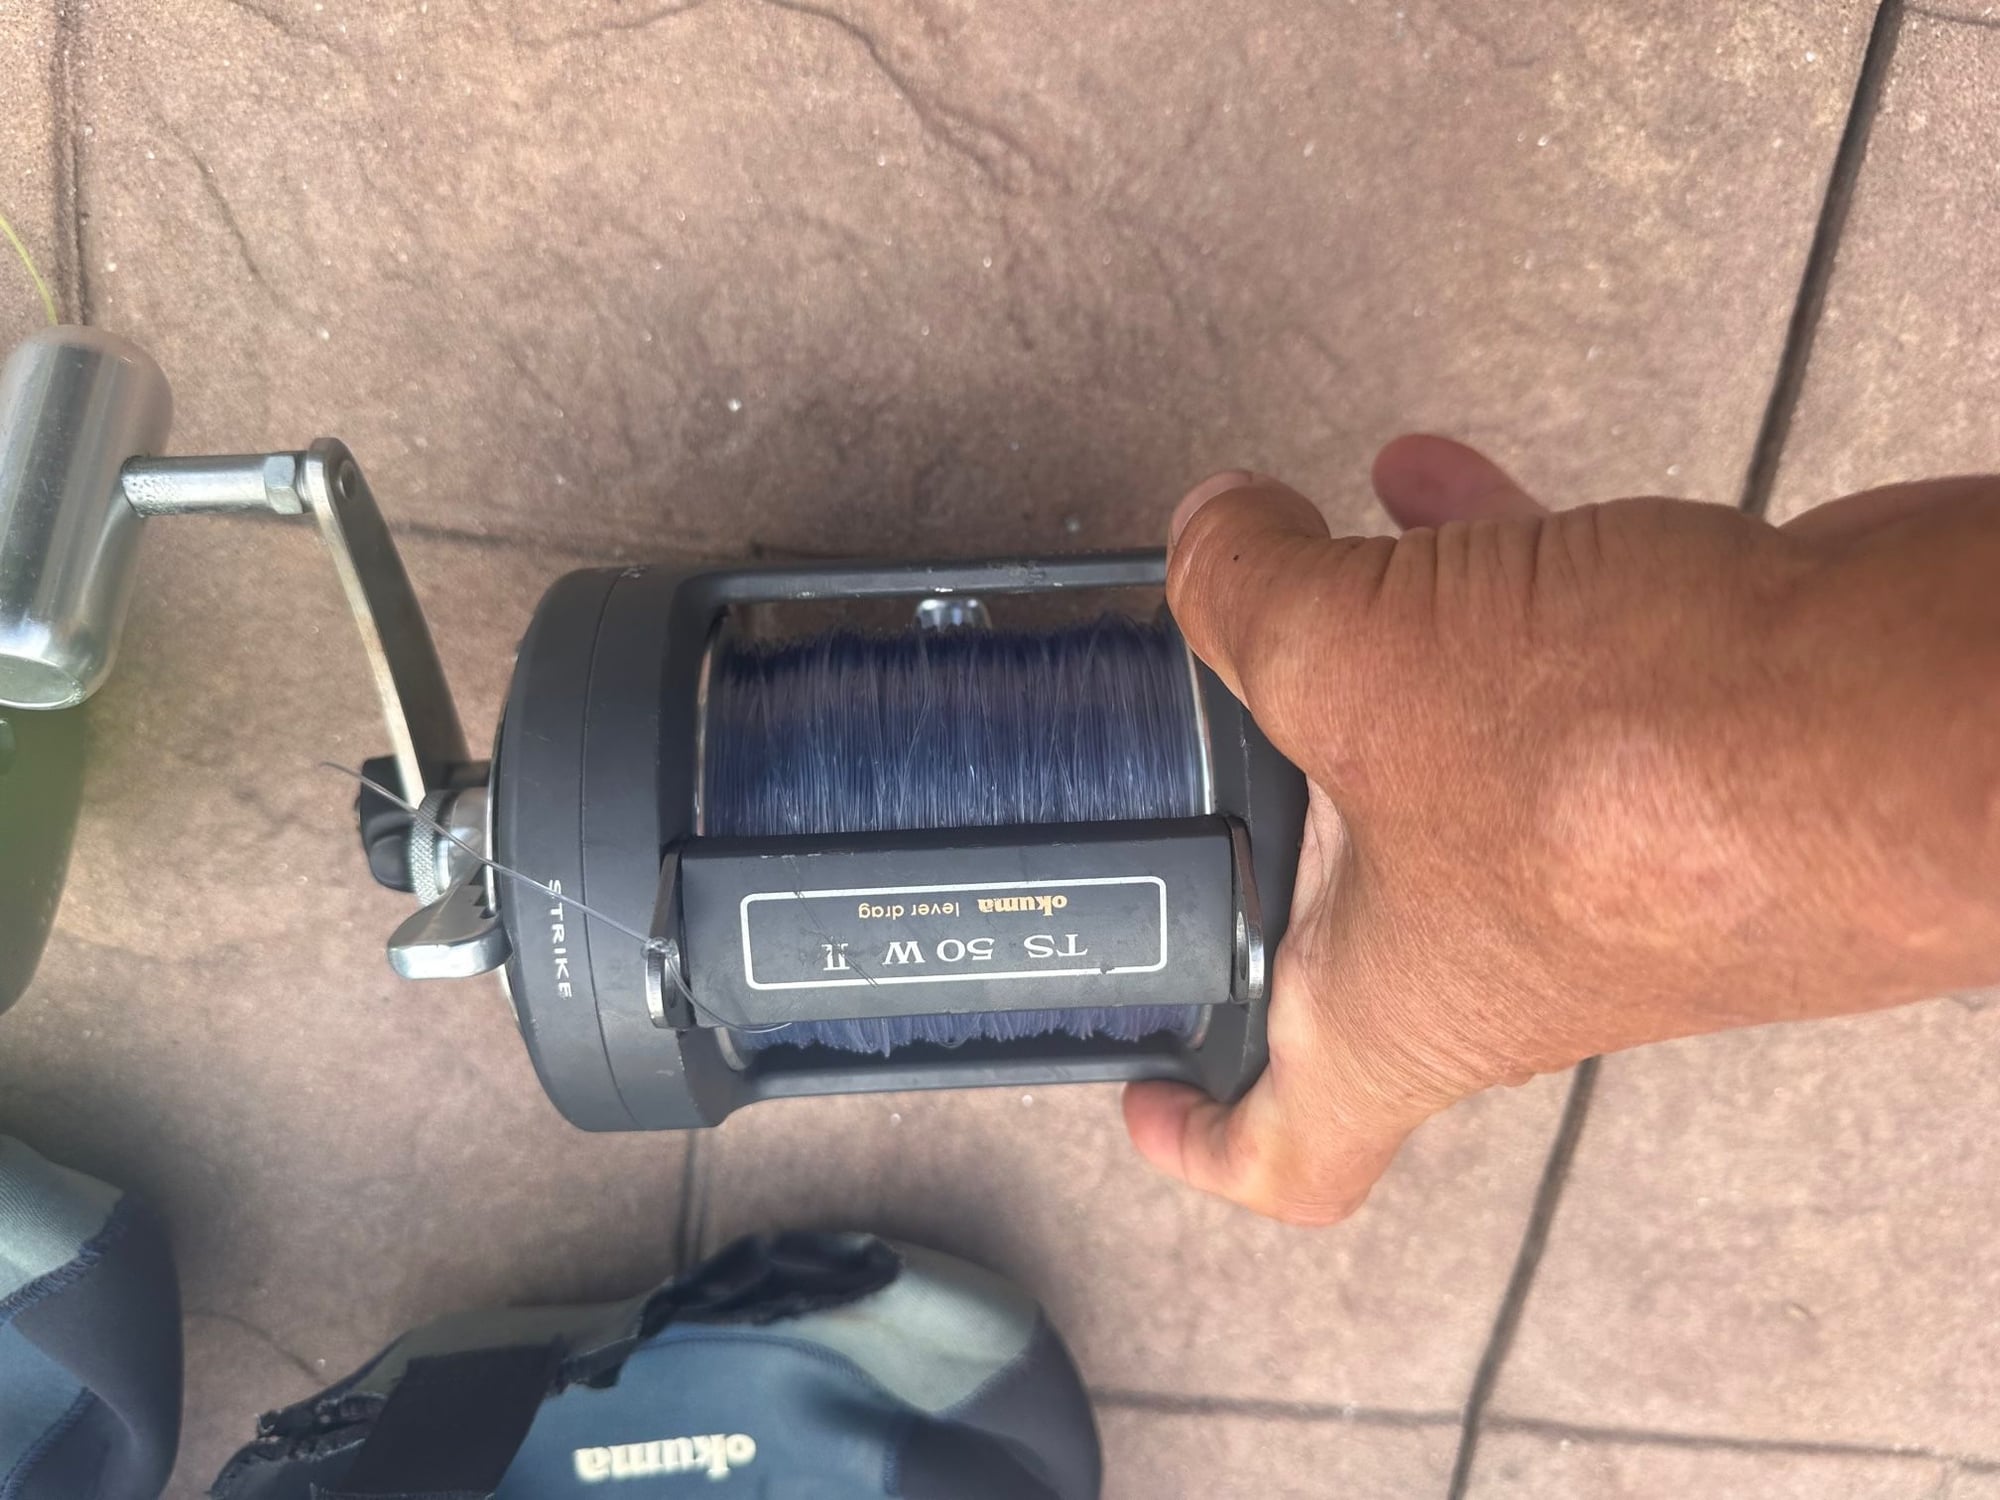 qty=2 Okuma Silver 50W 2 speed reels for sale - The Hull Truth - Boating  and Fishing Forum